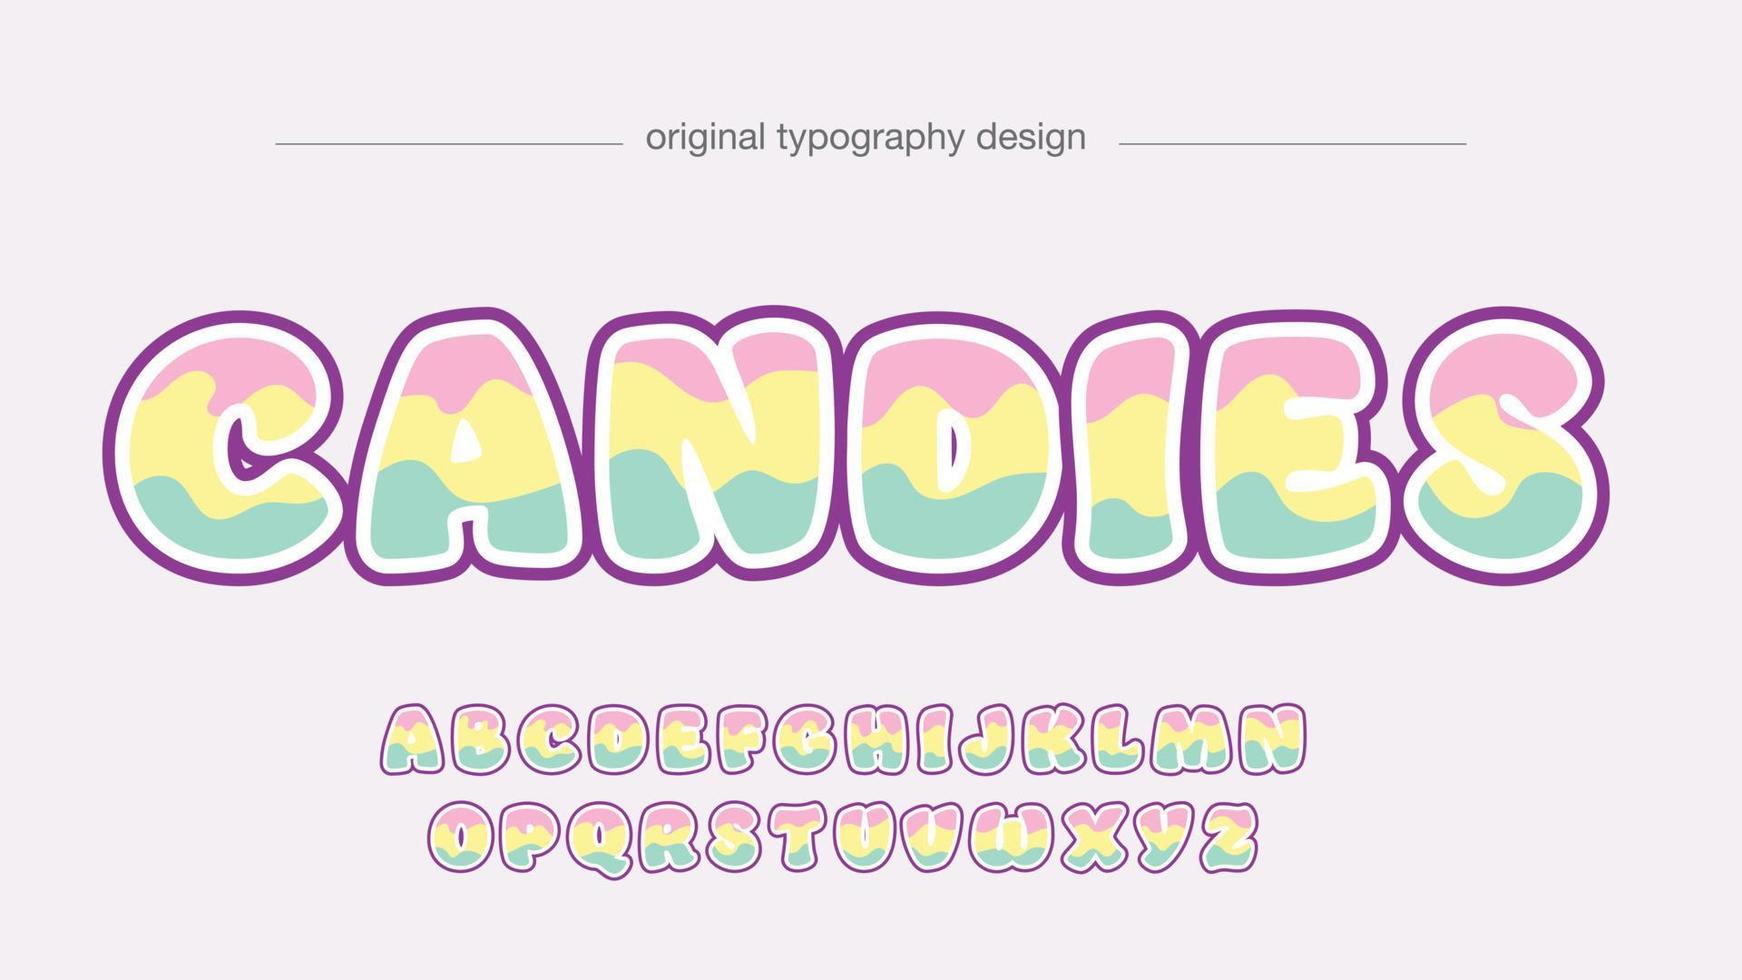 rounded pastel tone colors cartoon text effect vector